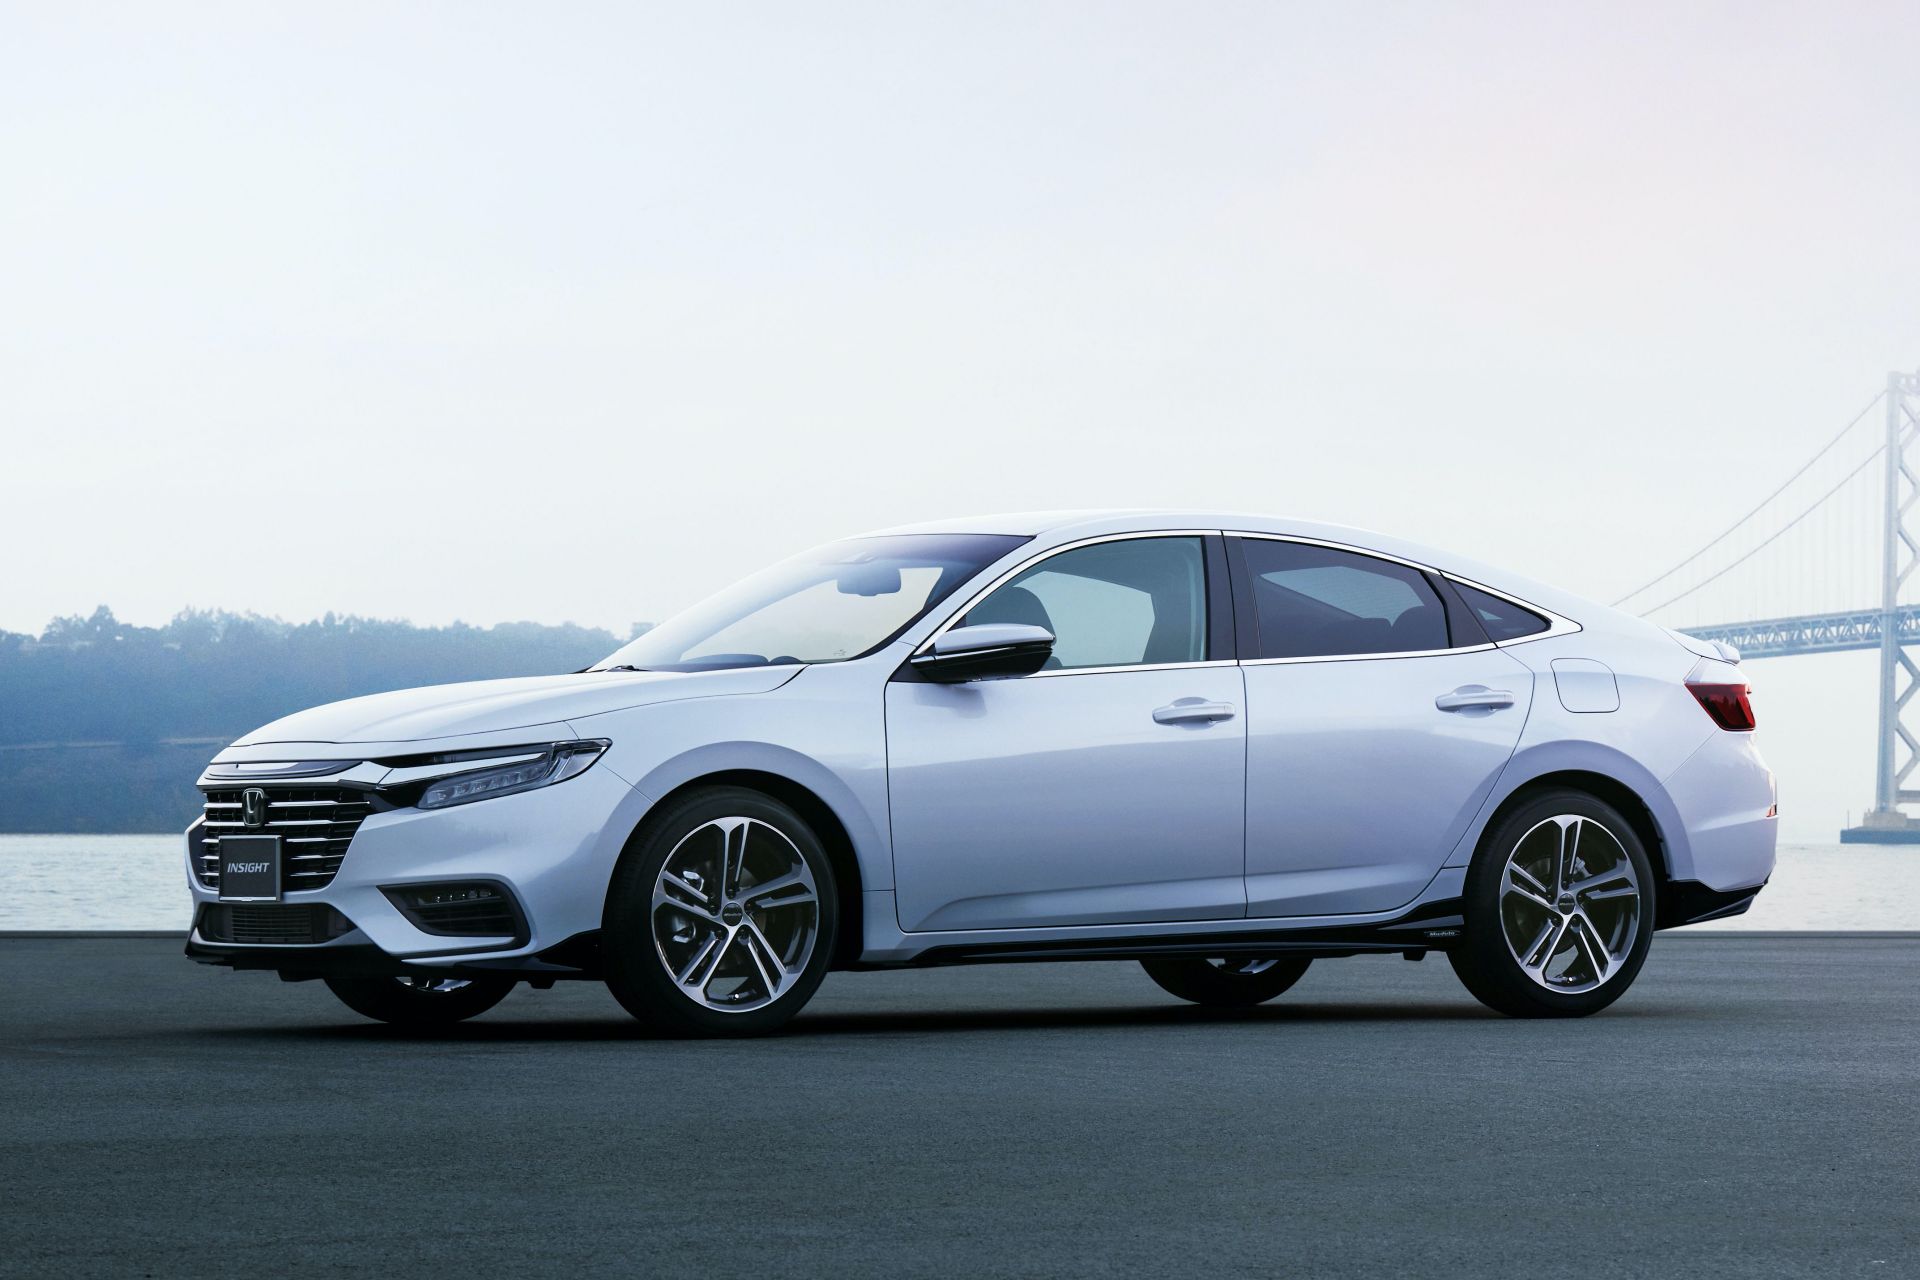 Honda Updates 21 Insight In Japan With New Trim Level Genuine Accessories Carscoops